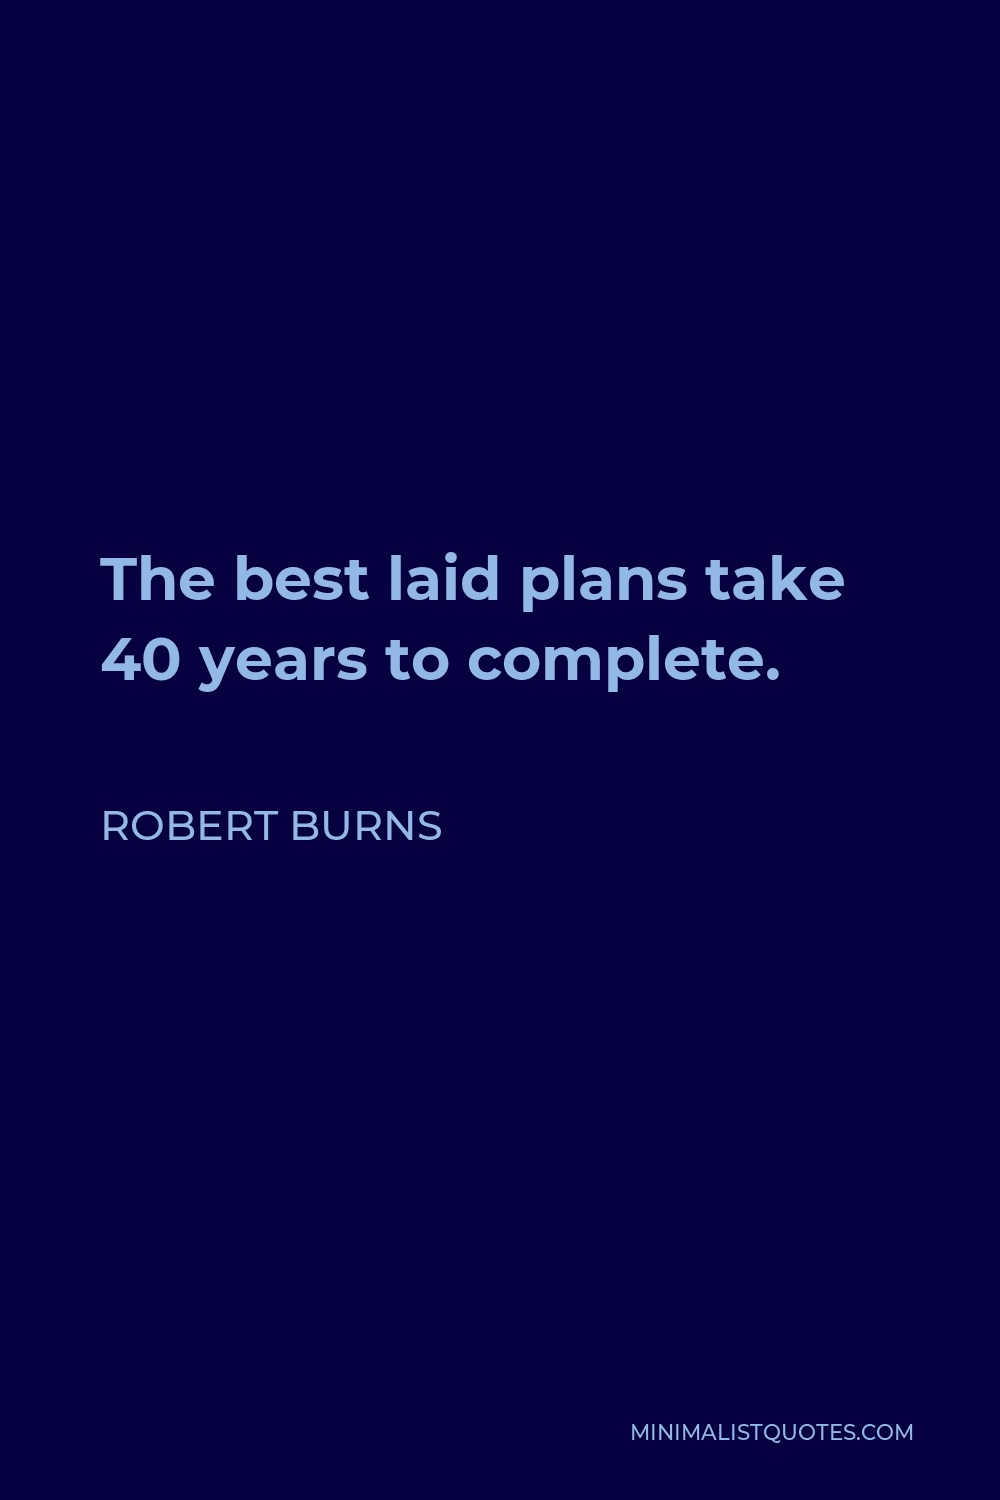 Robert Burns Quote - The best laid plans take 40 years to complete.